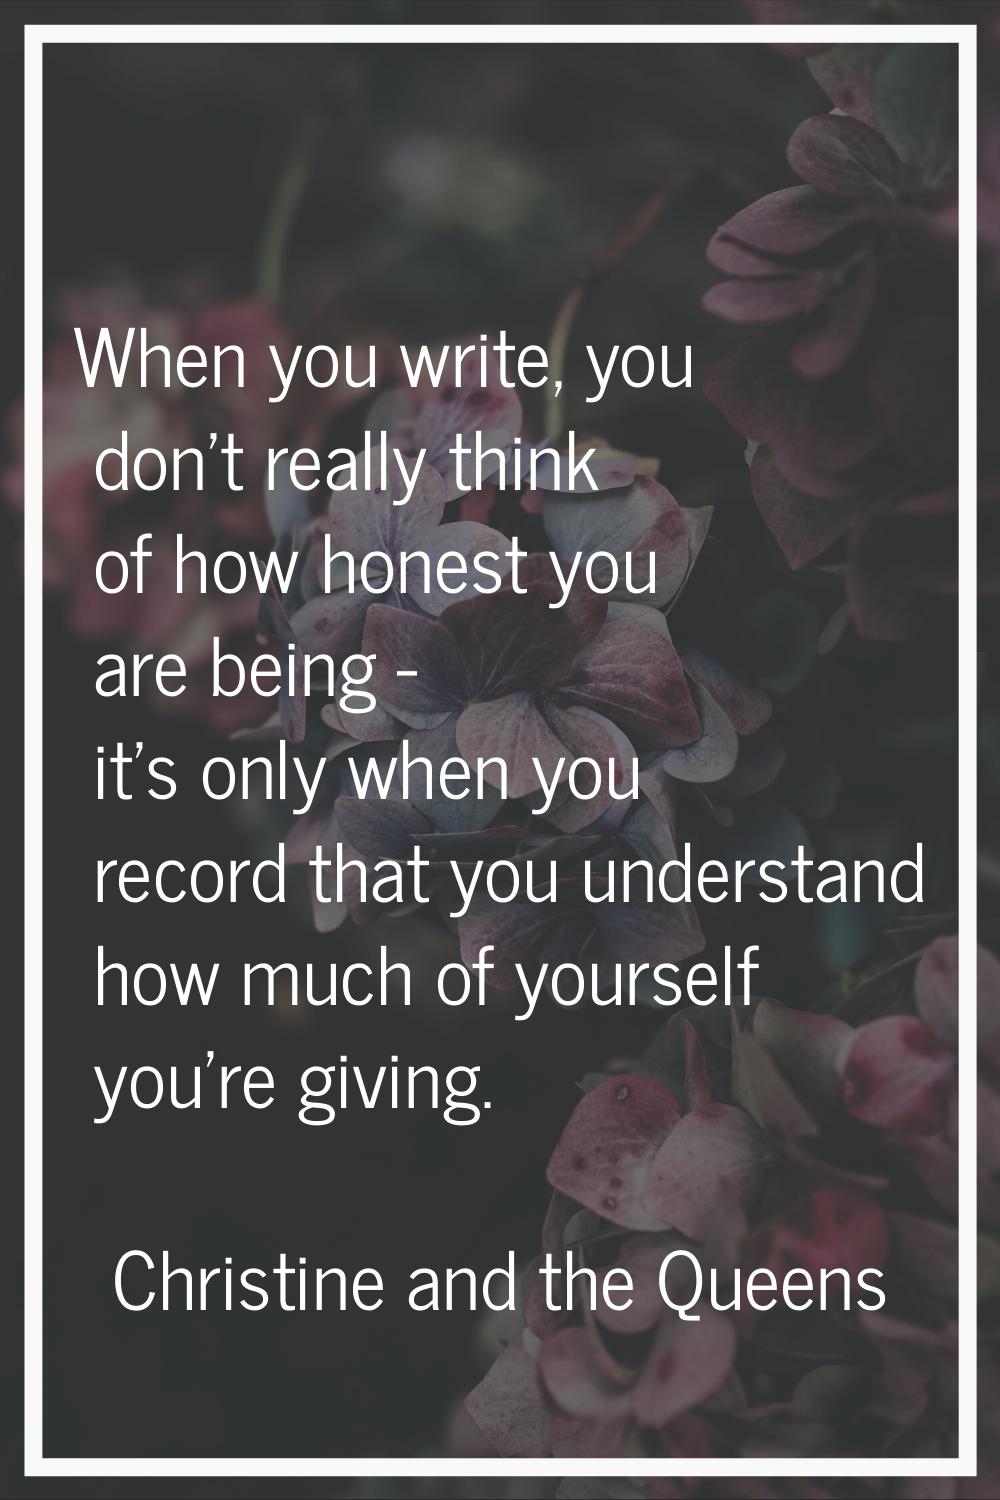 When you write, you don't really think of how honest you are being - it's only when you record that